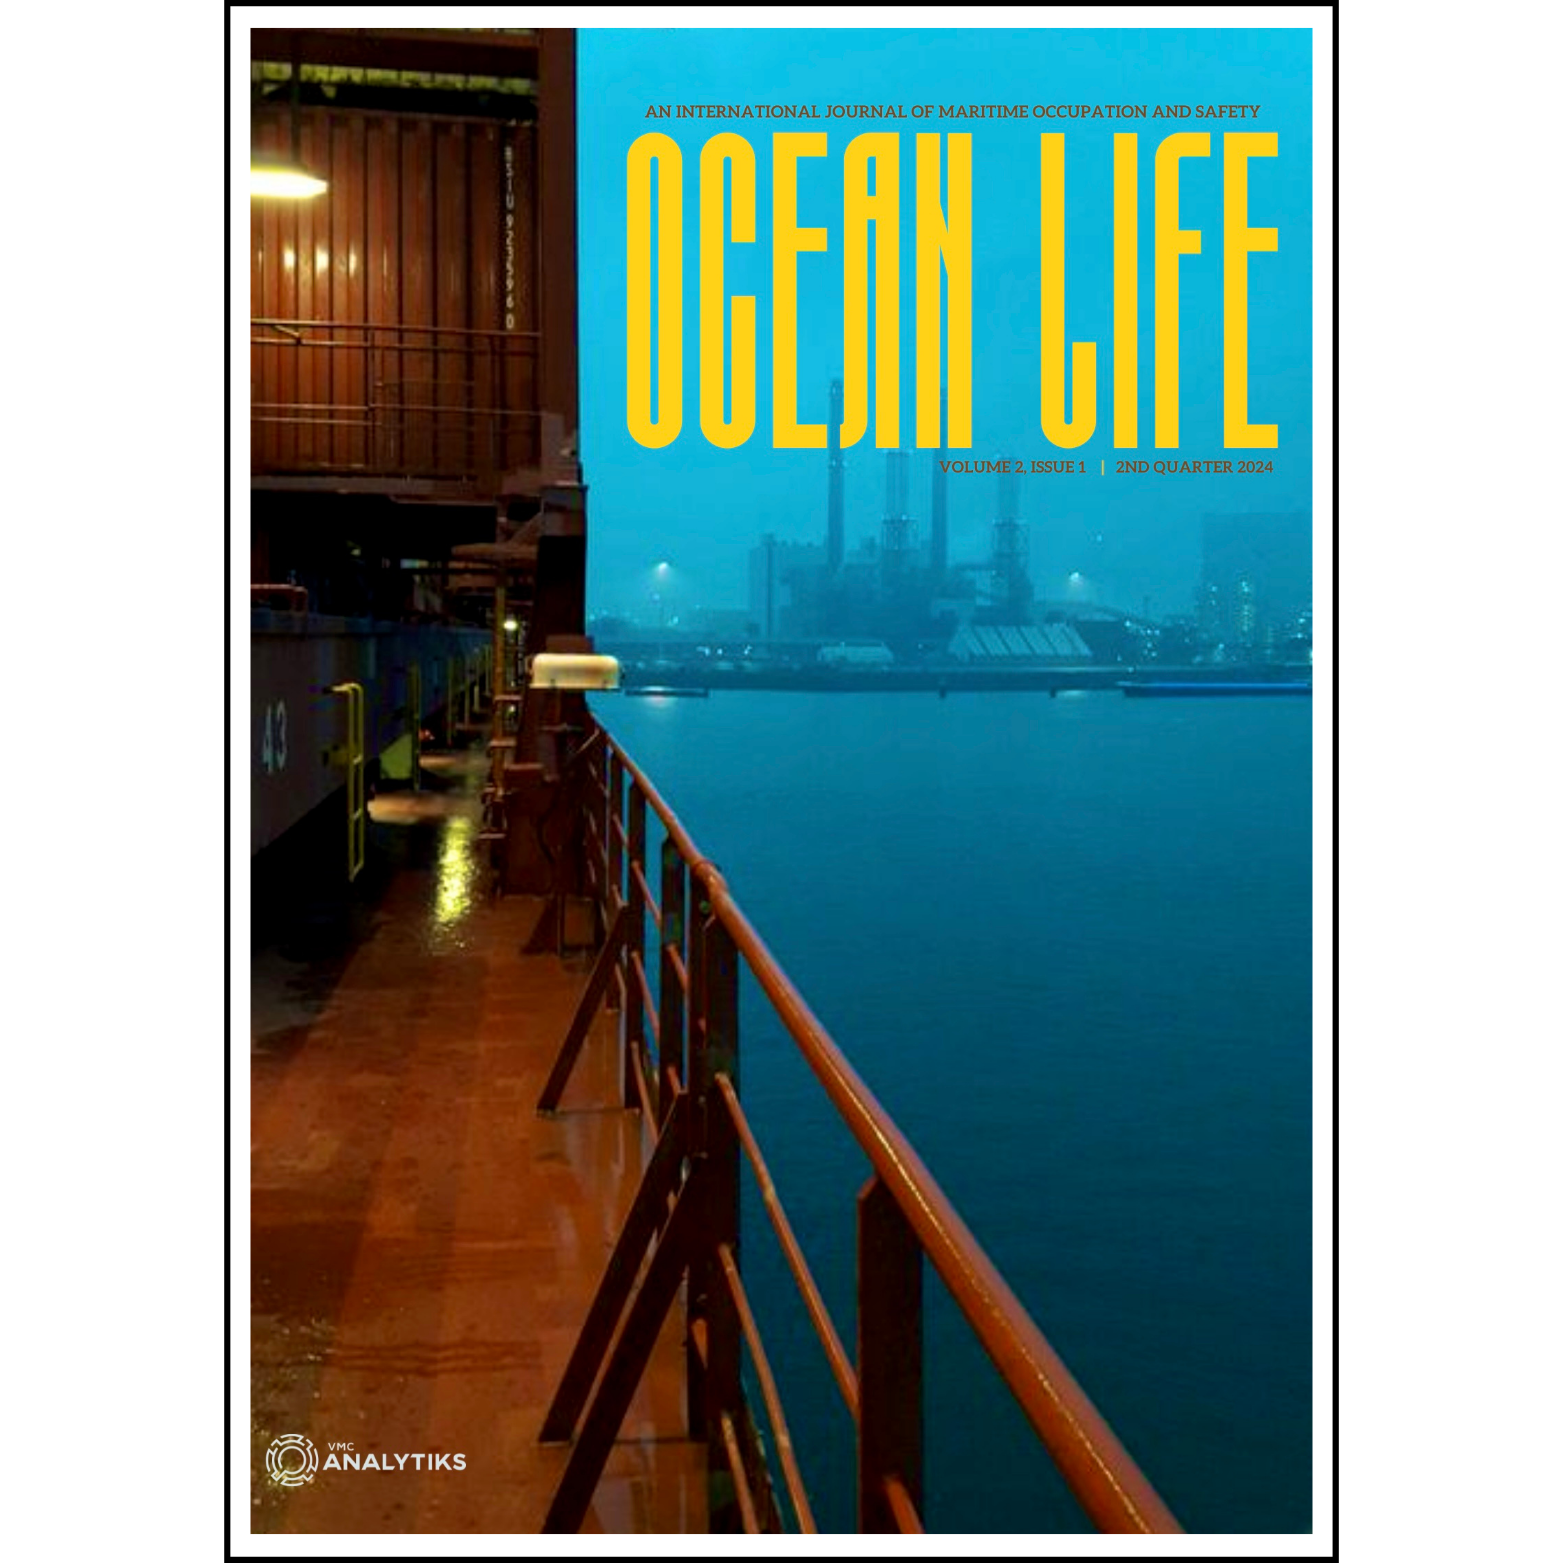 Ocean Life: An International Journal of Maritime Occupation and Safety